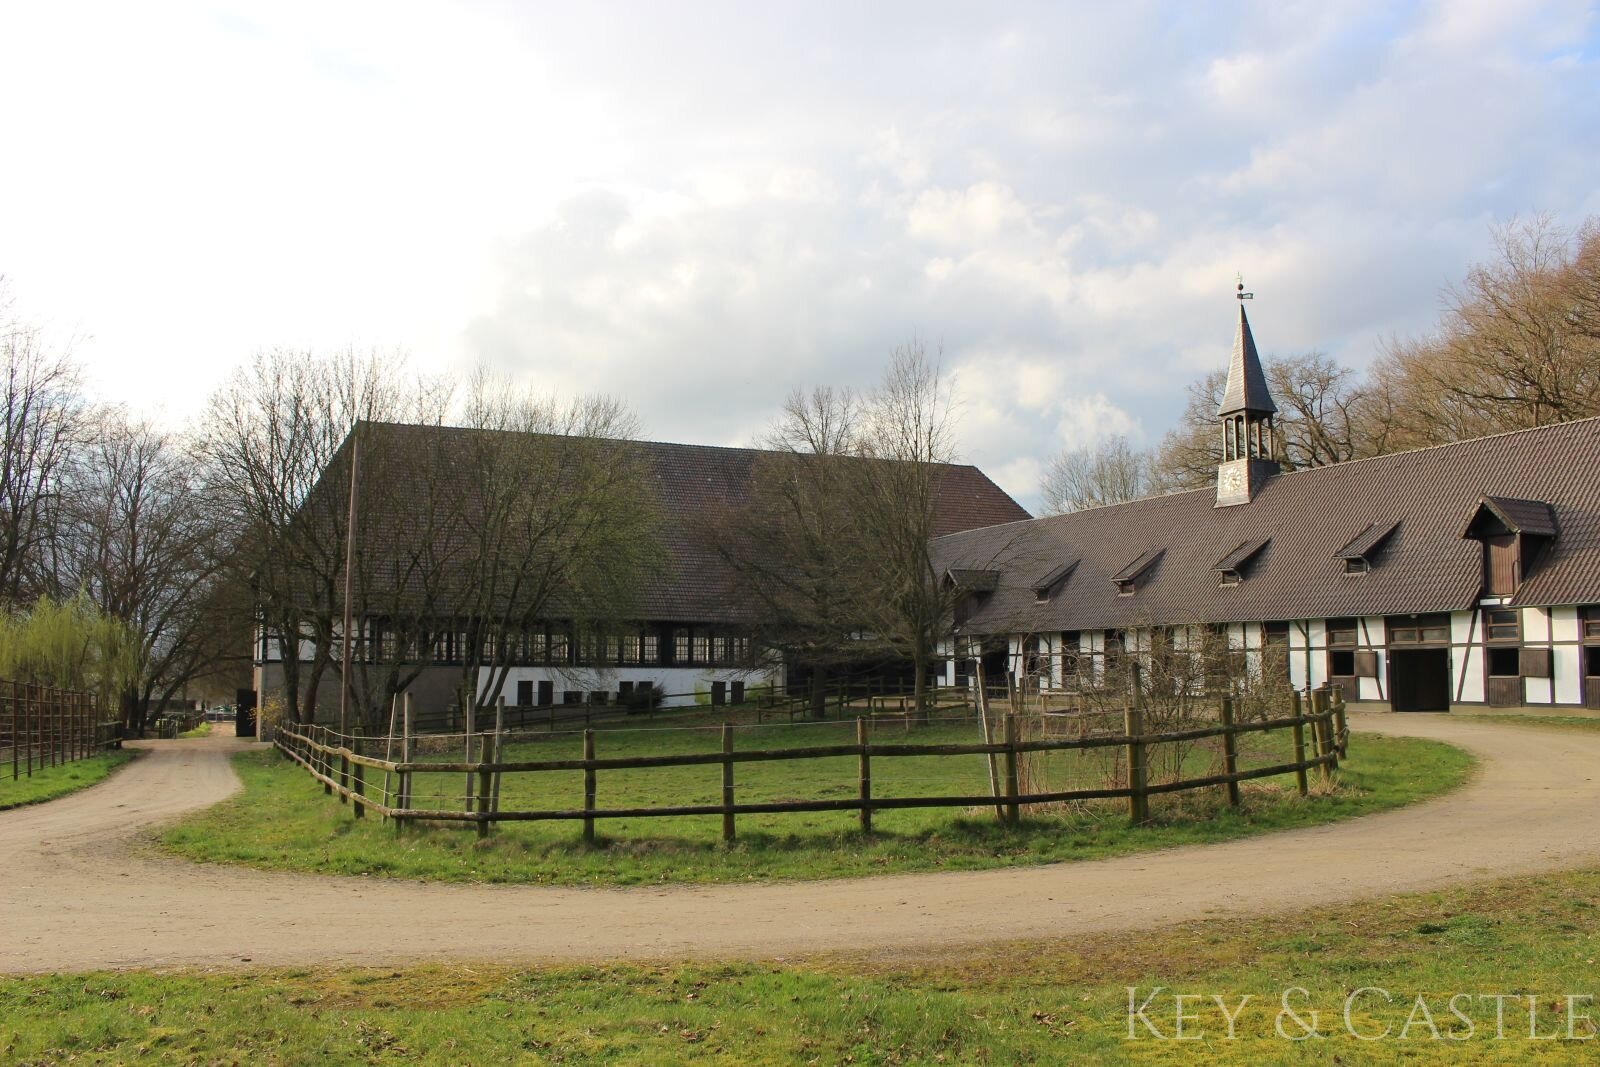 View of the main stable and indoor riding arena